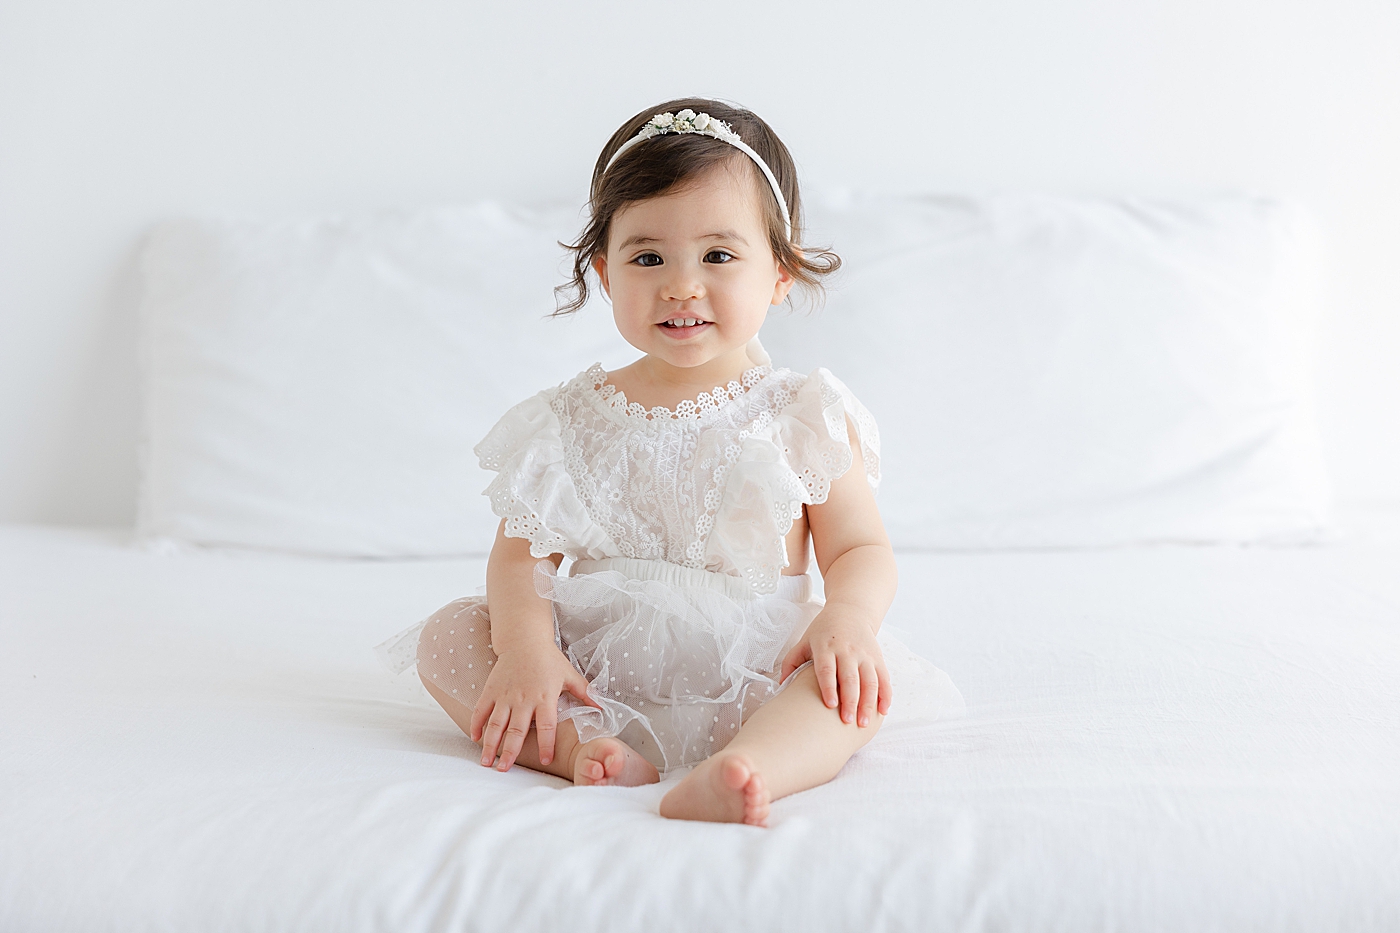 Baby girl in a white headband and dress smiling | Image by Sana Ahmed Photography